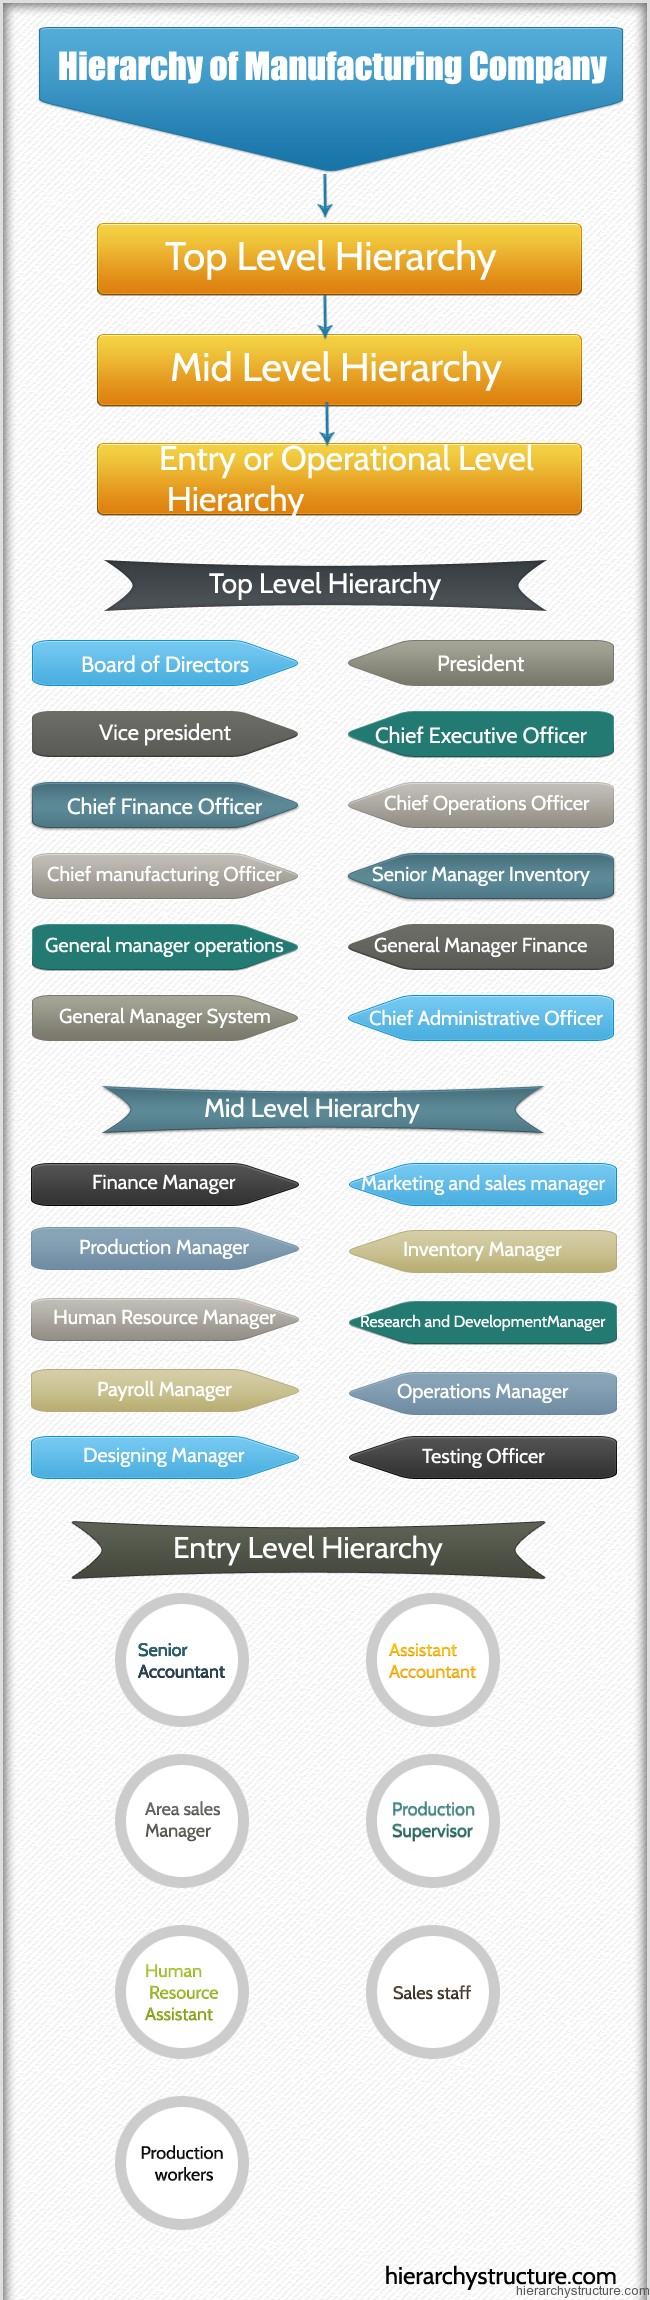 Hierarchy of Manufacturing Company